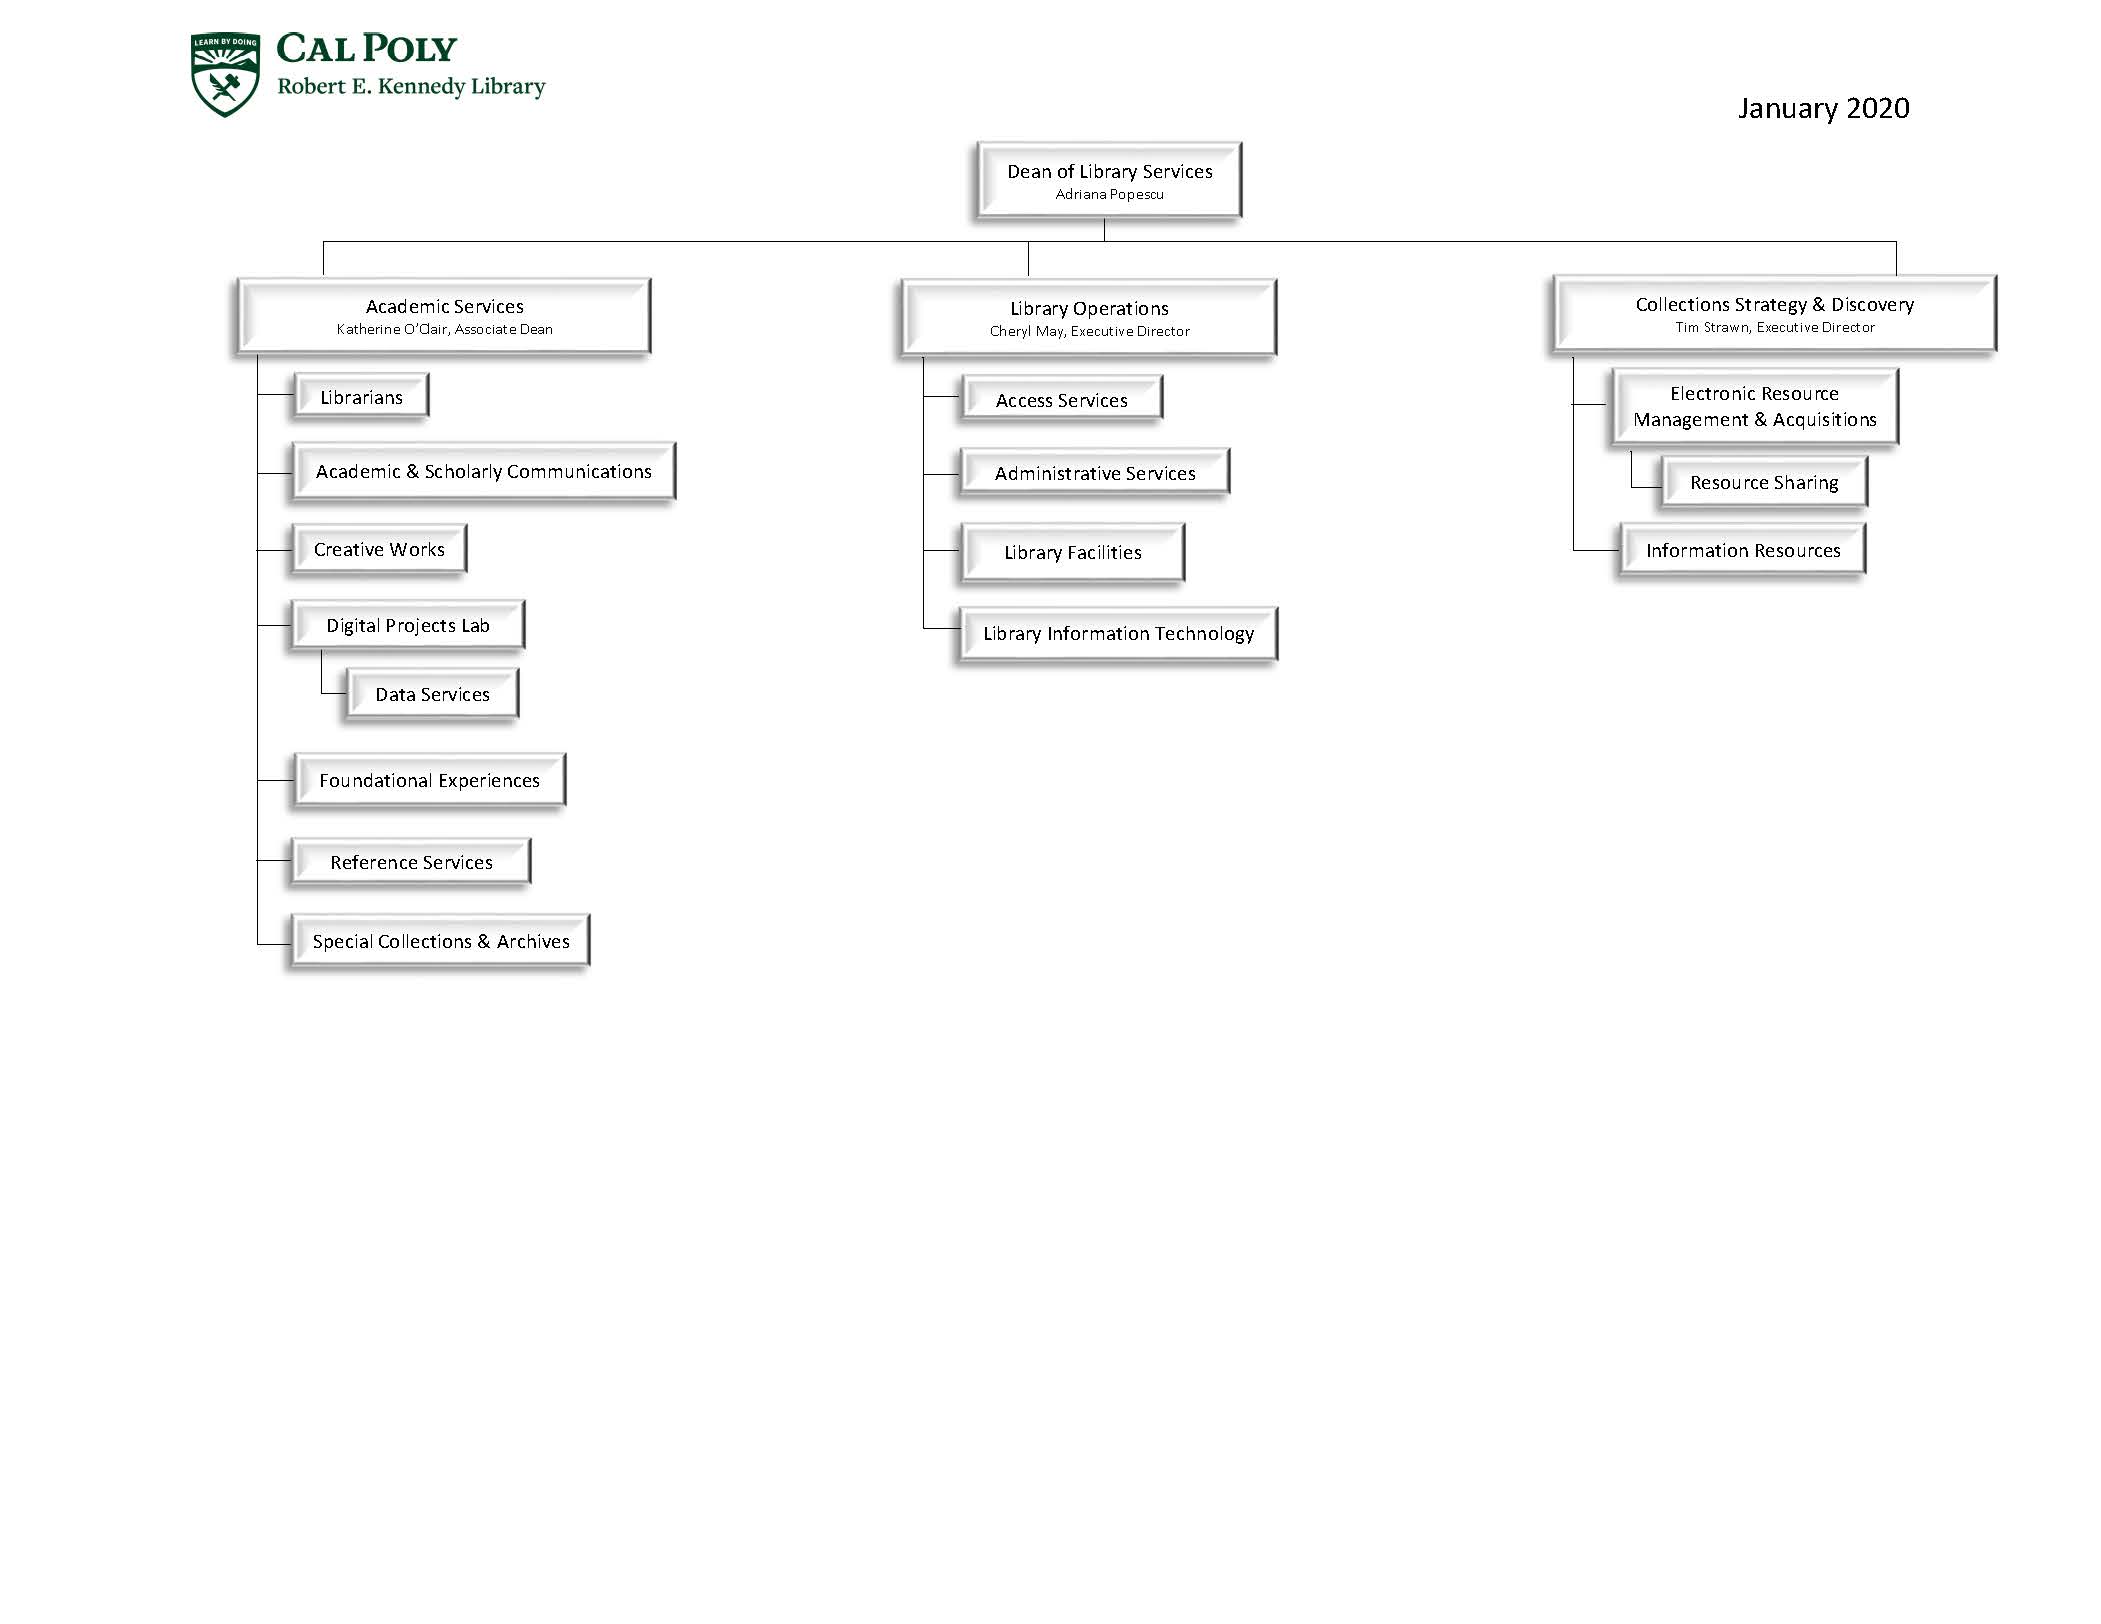 01.2020 Library Org Chart_Page_1